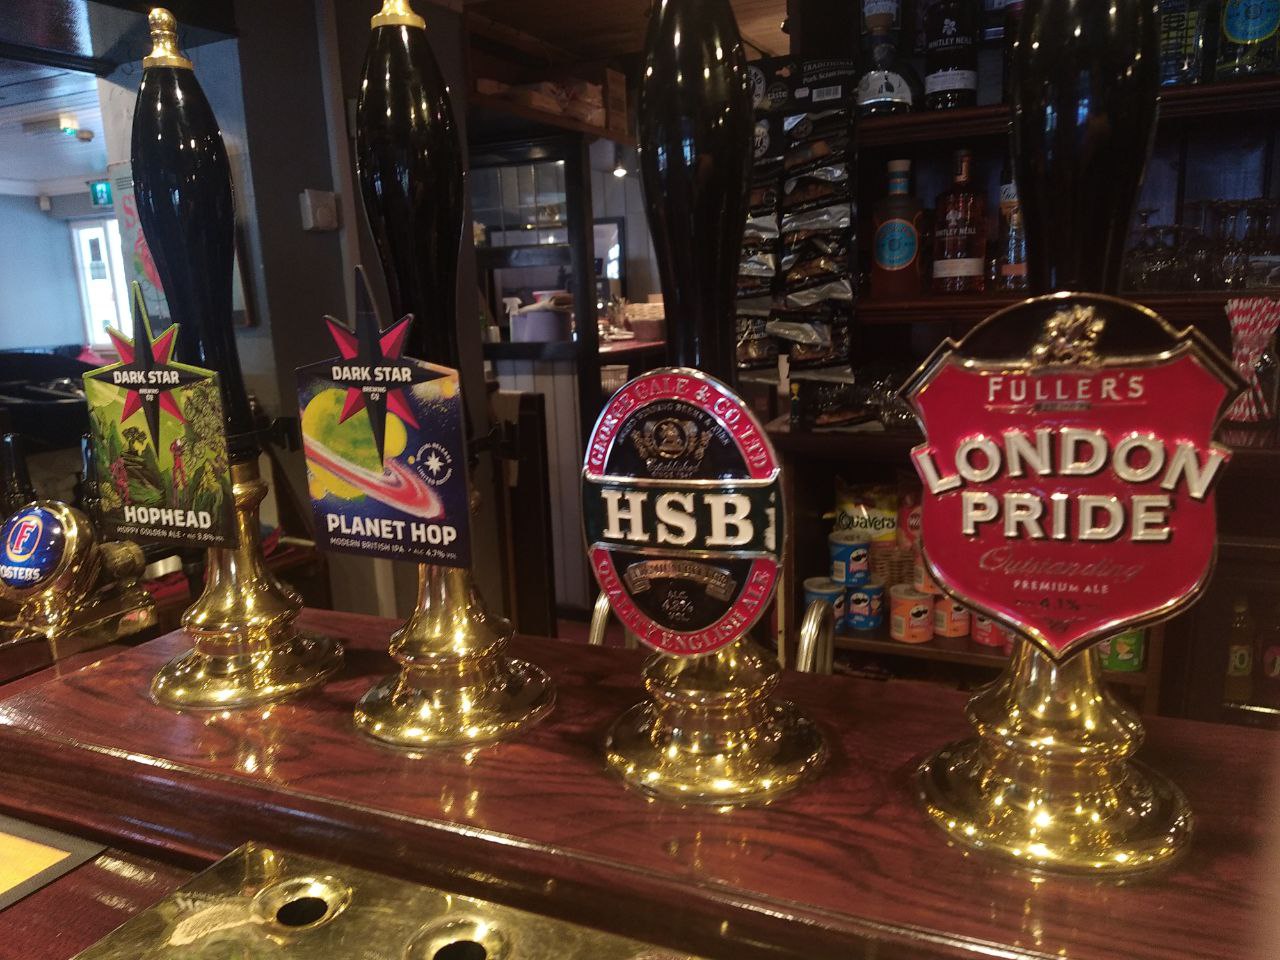 Choices of real ales in a Portsmouth pub